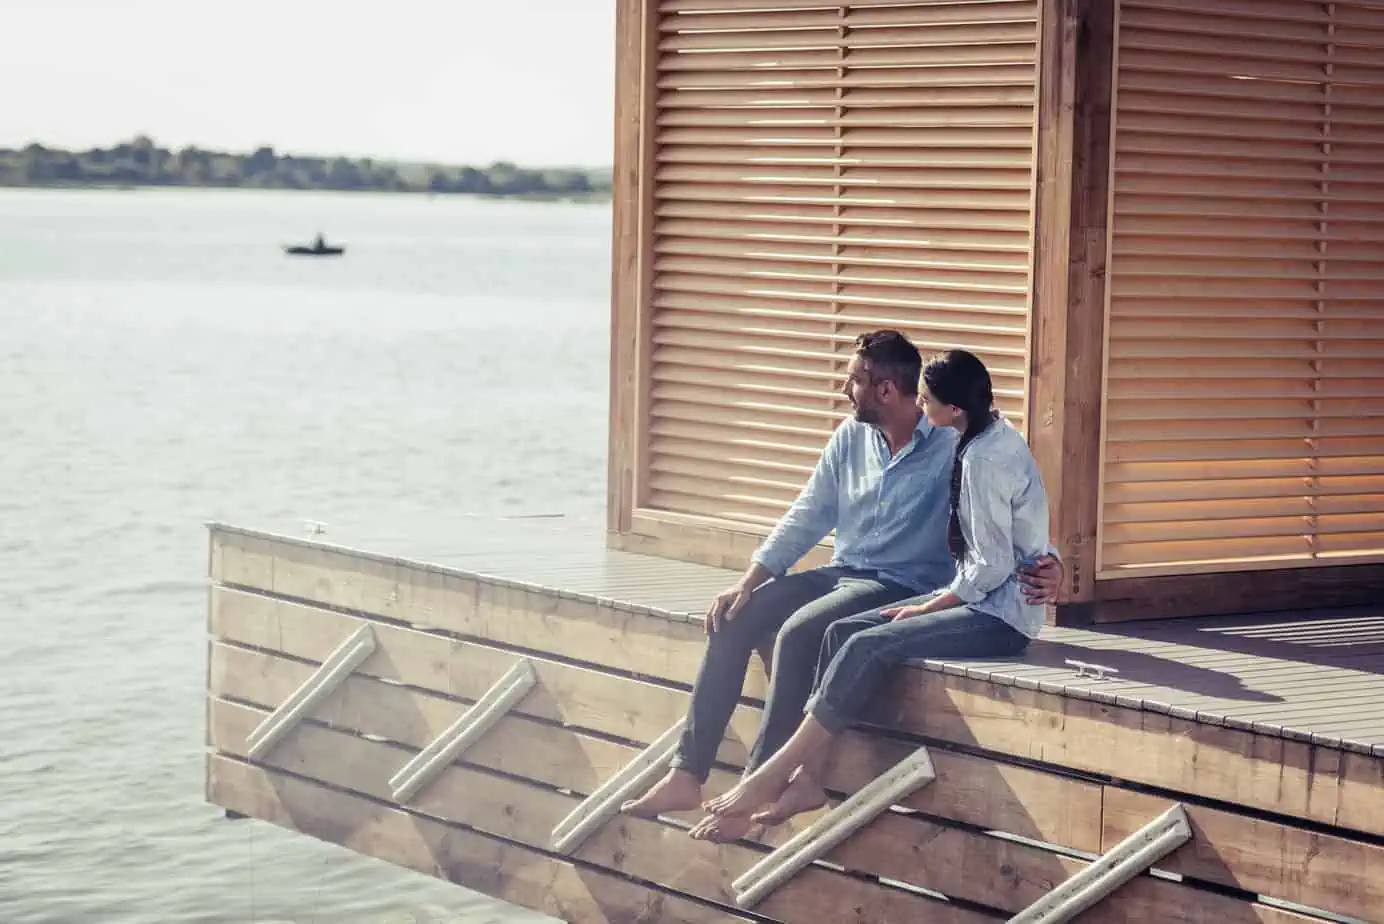 A man and a woman sitting on a dock next to a body of water